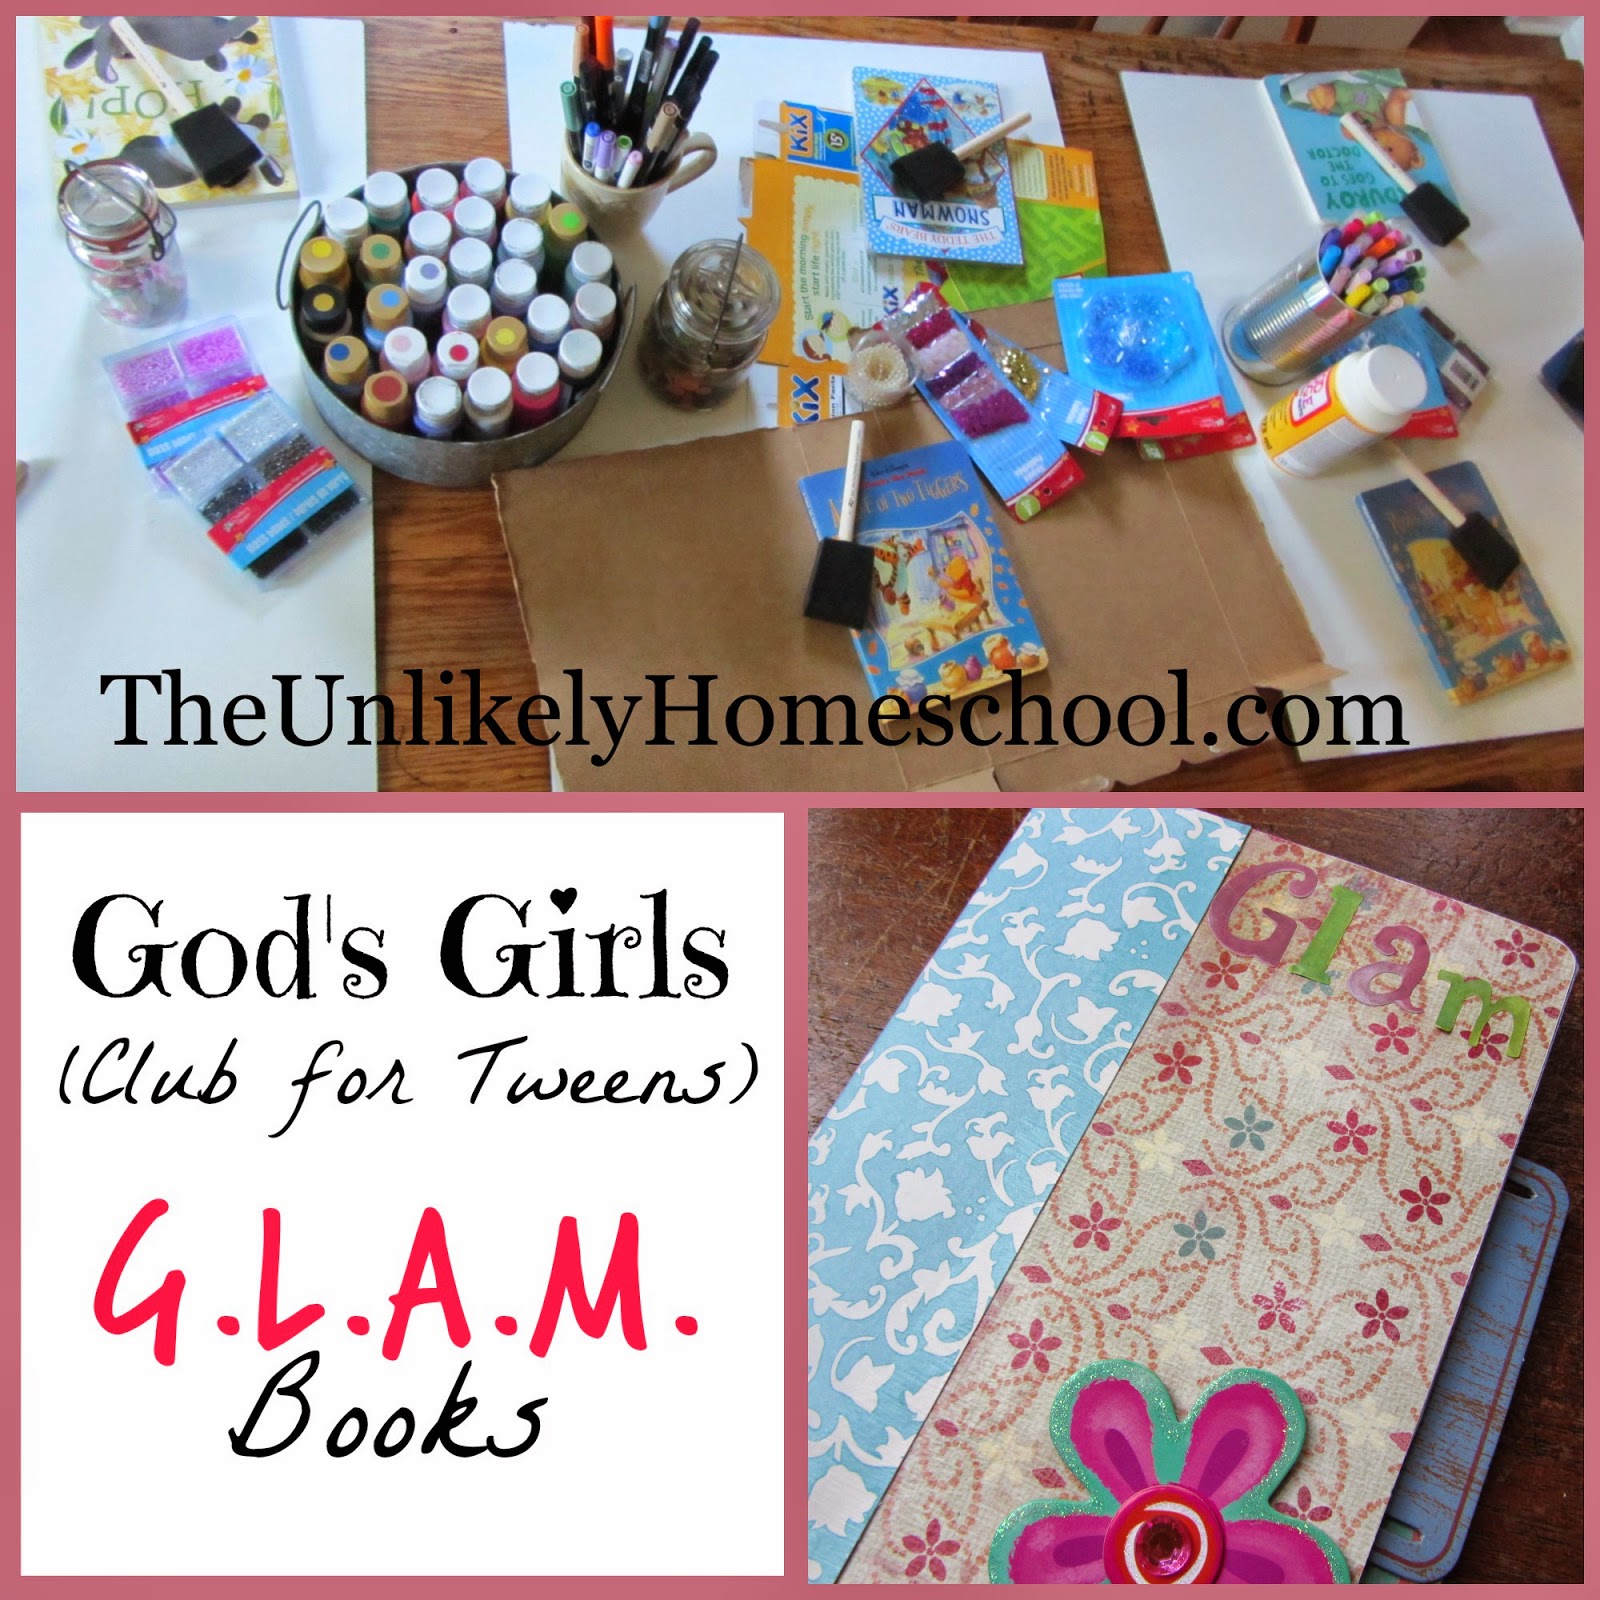 God's Girls (Club for Tween Girls) make a GLAM book (God's Love and Adoration for Me) club meeting ideas and format {The Unlikely Homeschool}